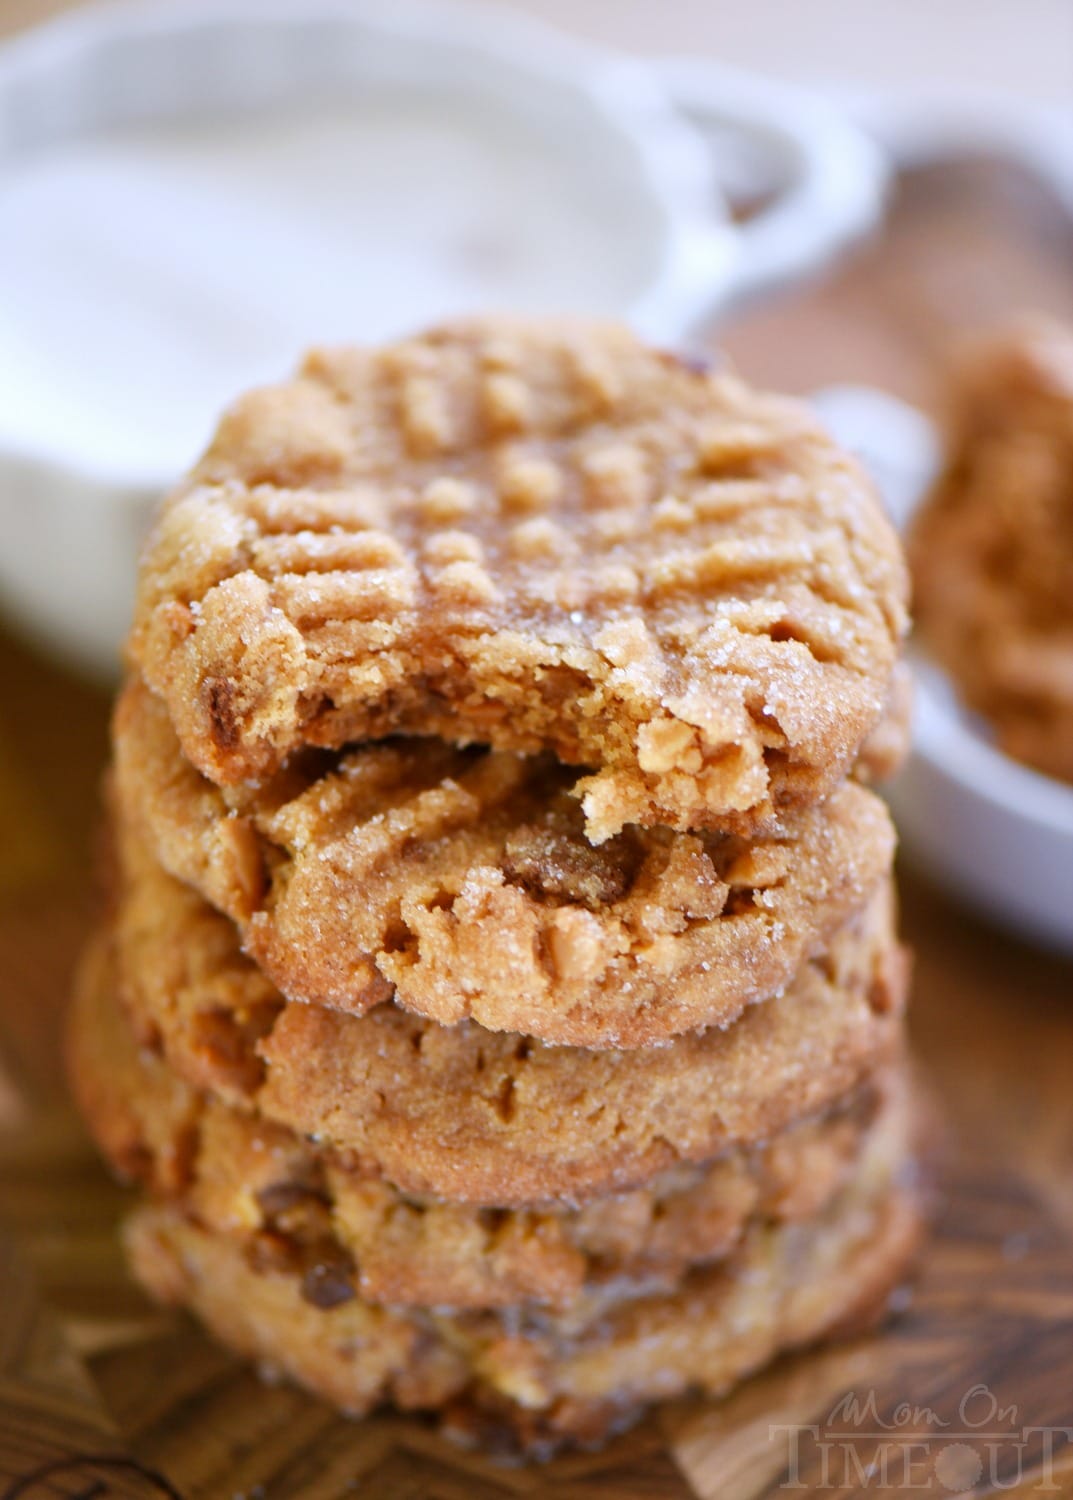 These easy, 5-ingredient Flourless Toffee Peanut Butter Cookies are the most peanut-buttery cookie EVER! The perfect cookie for peanut butter lovers! Serve with an ice cold glass of milk for extreme satisfaction! // Mom On Timeout